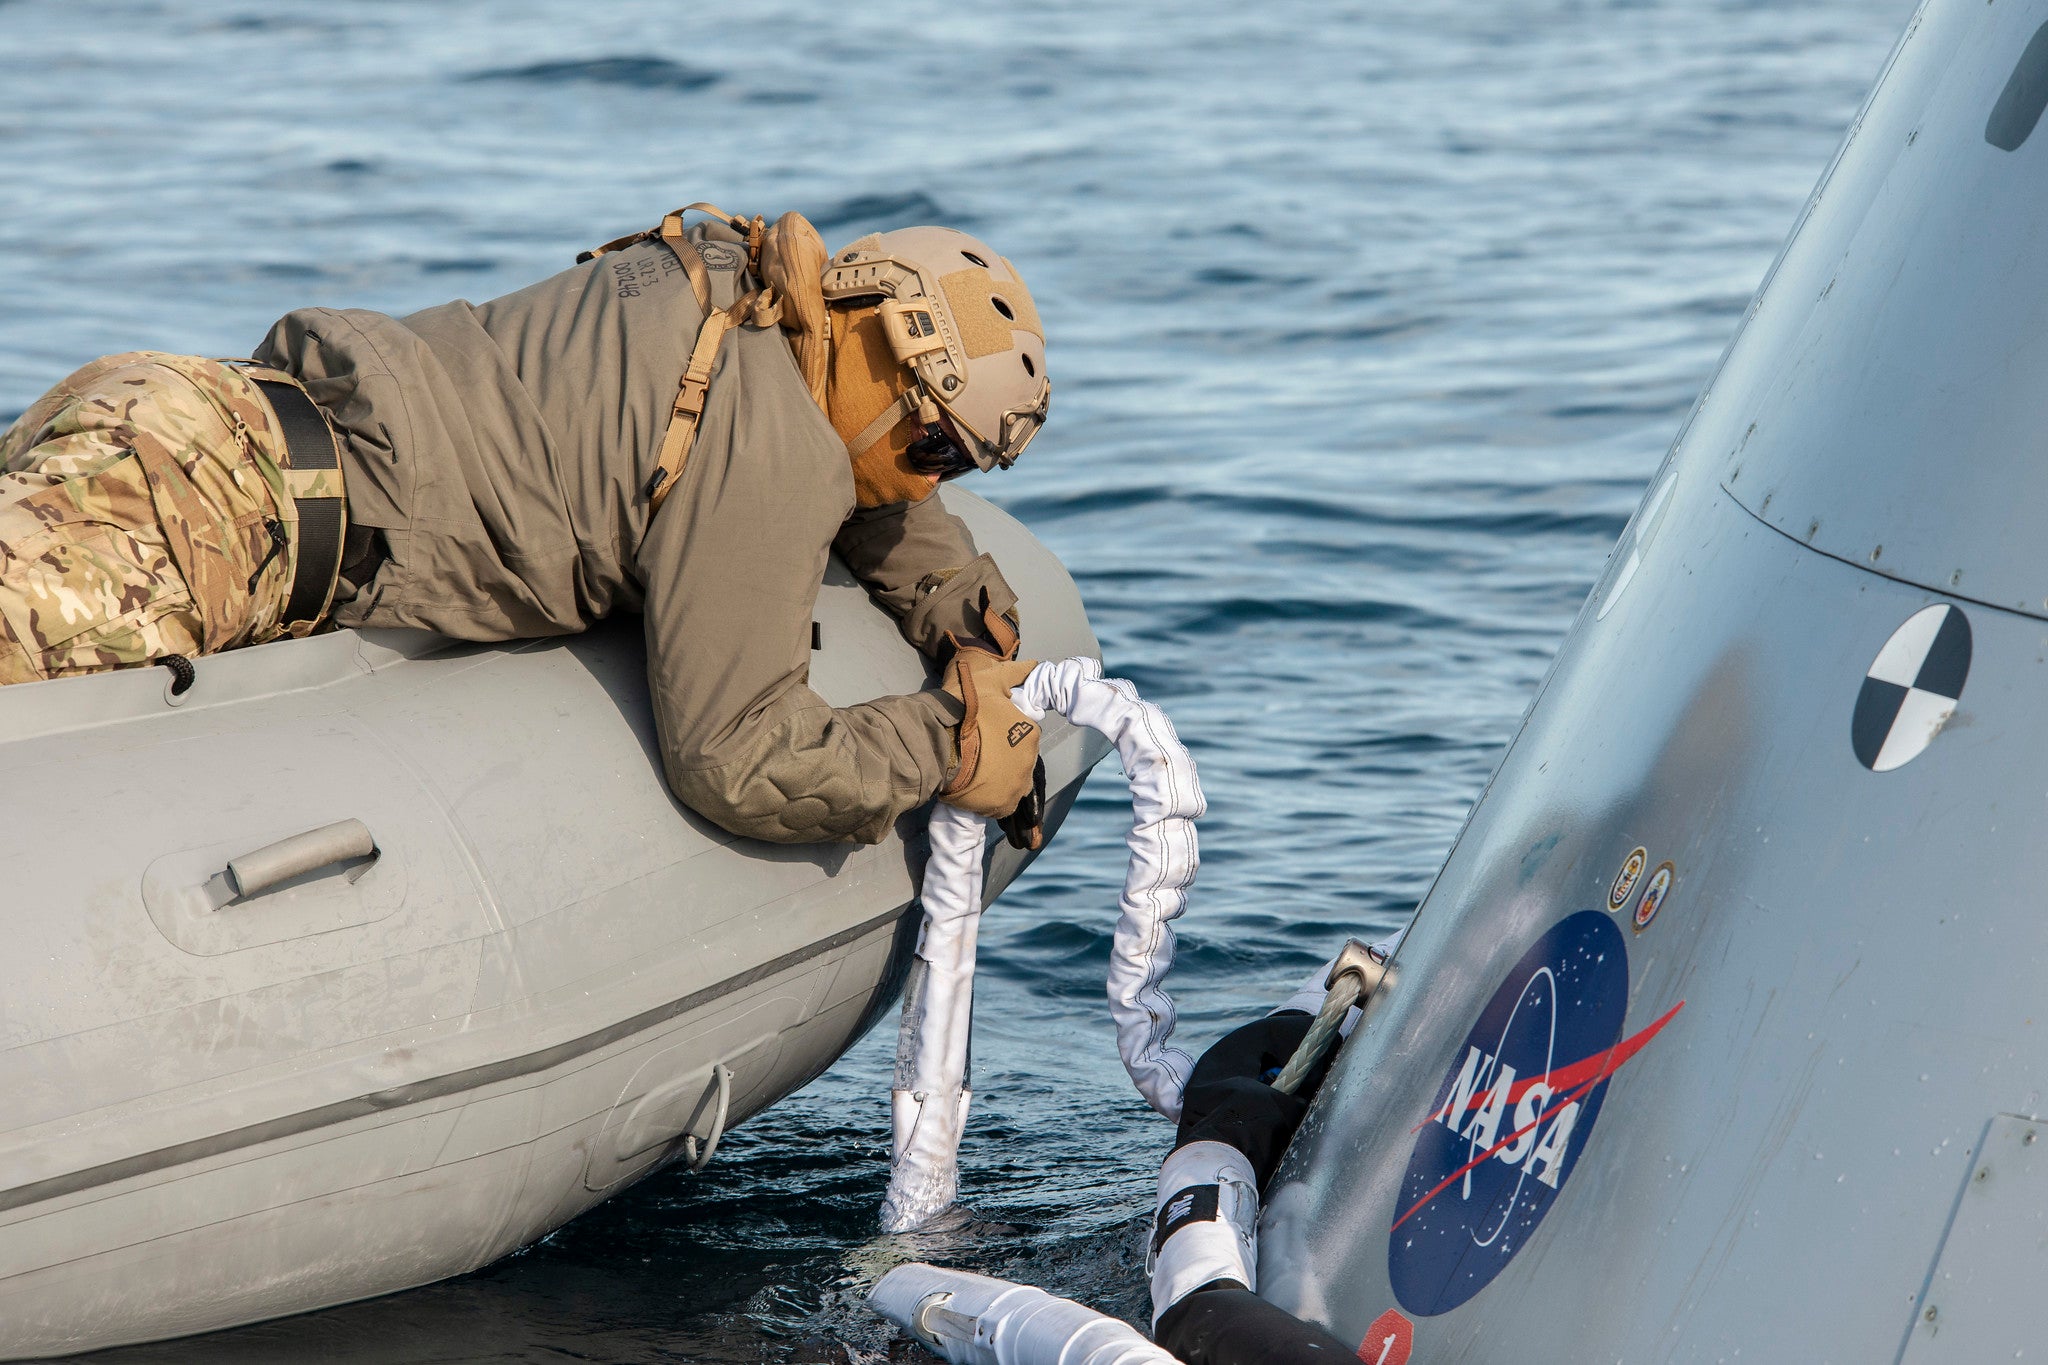 A recovery team member installing lines during a practice exercise on December 2, 2022. (Photo: NASA)